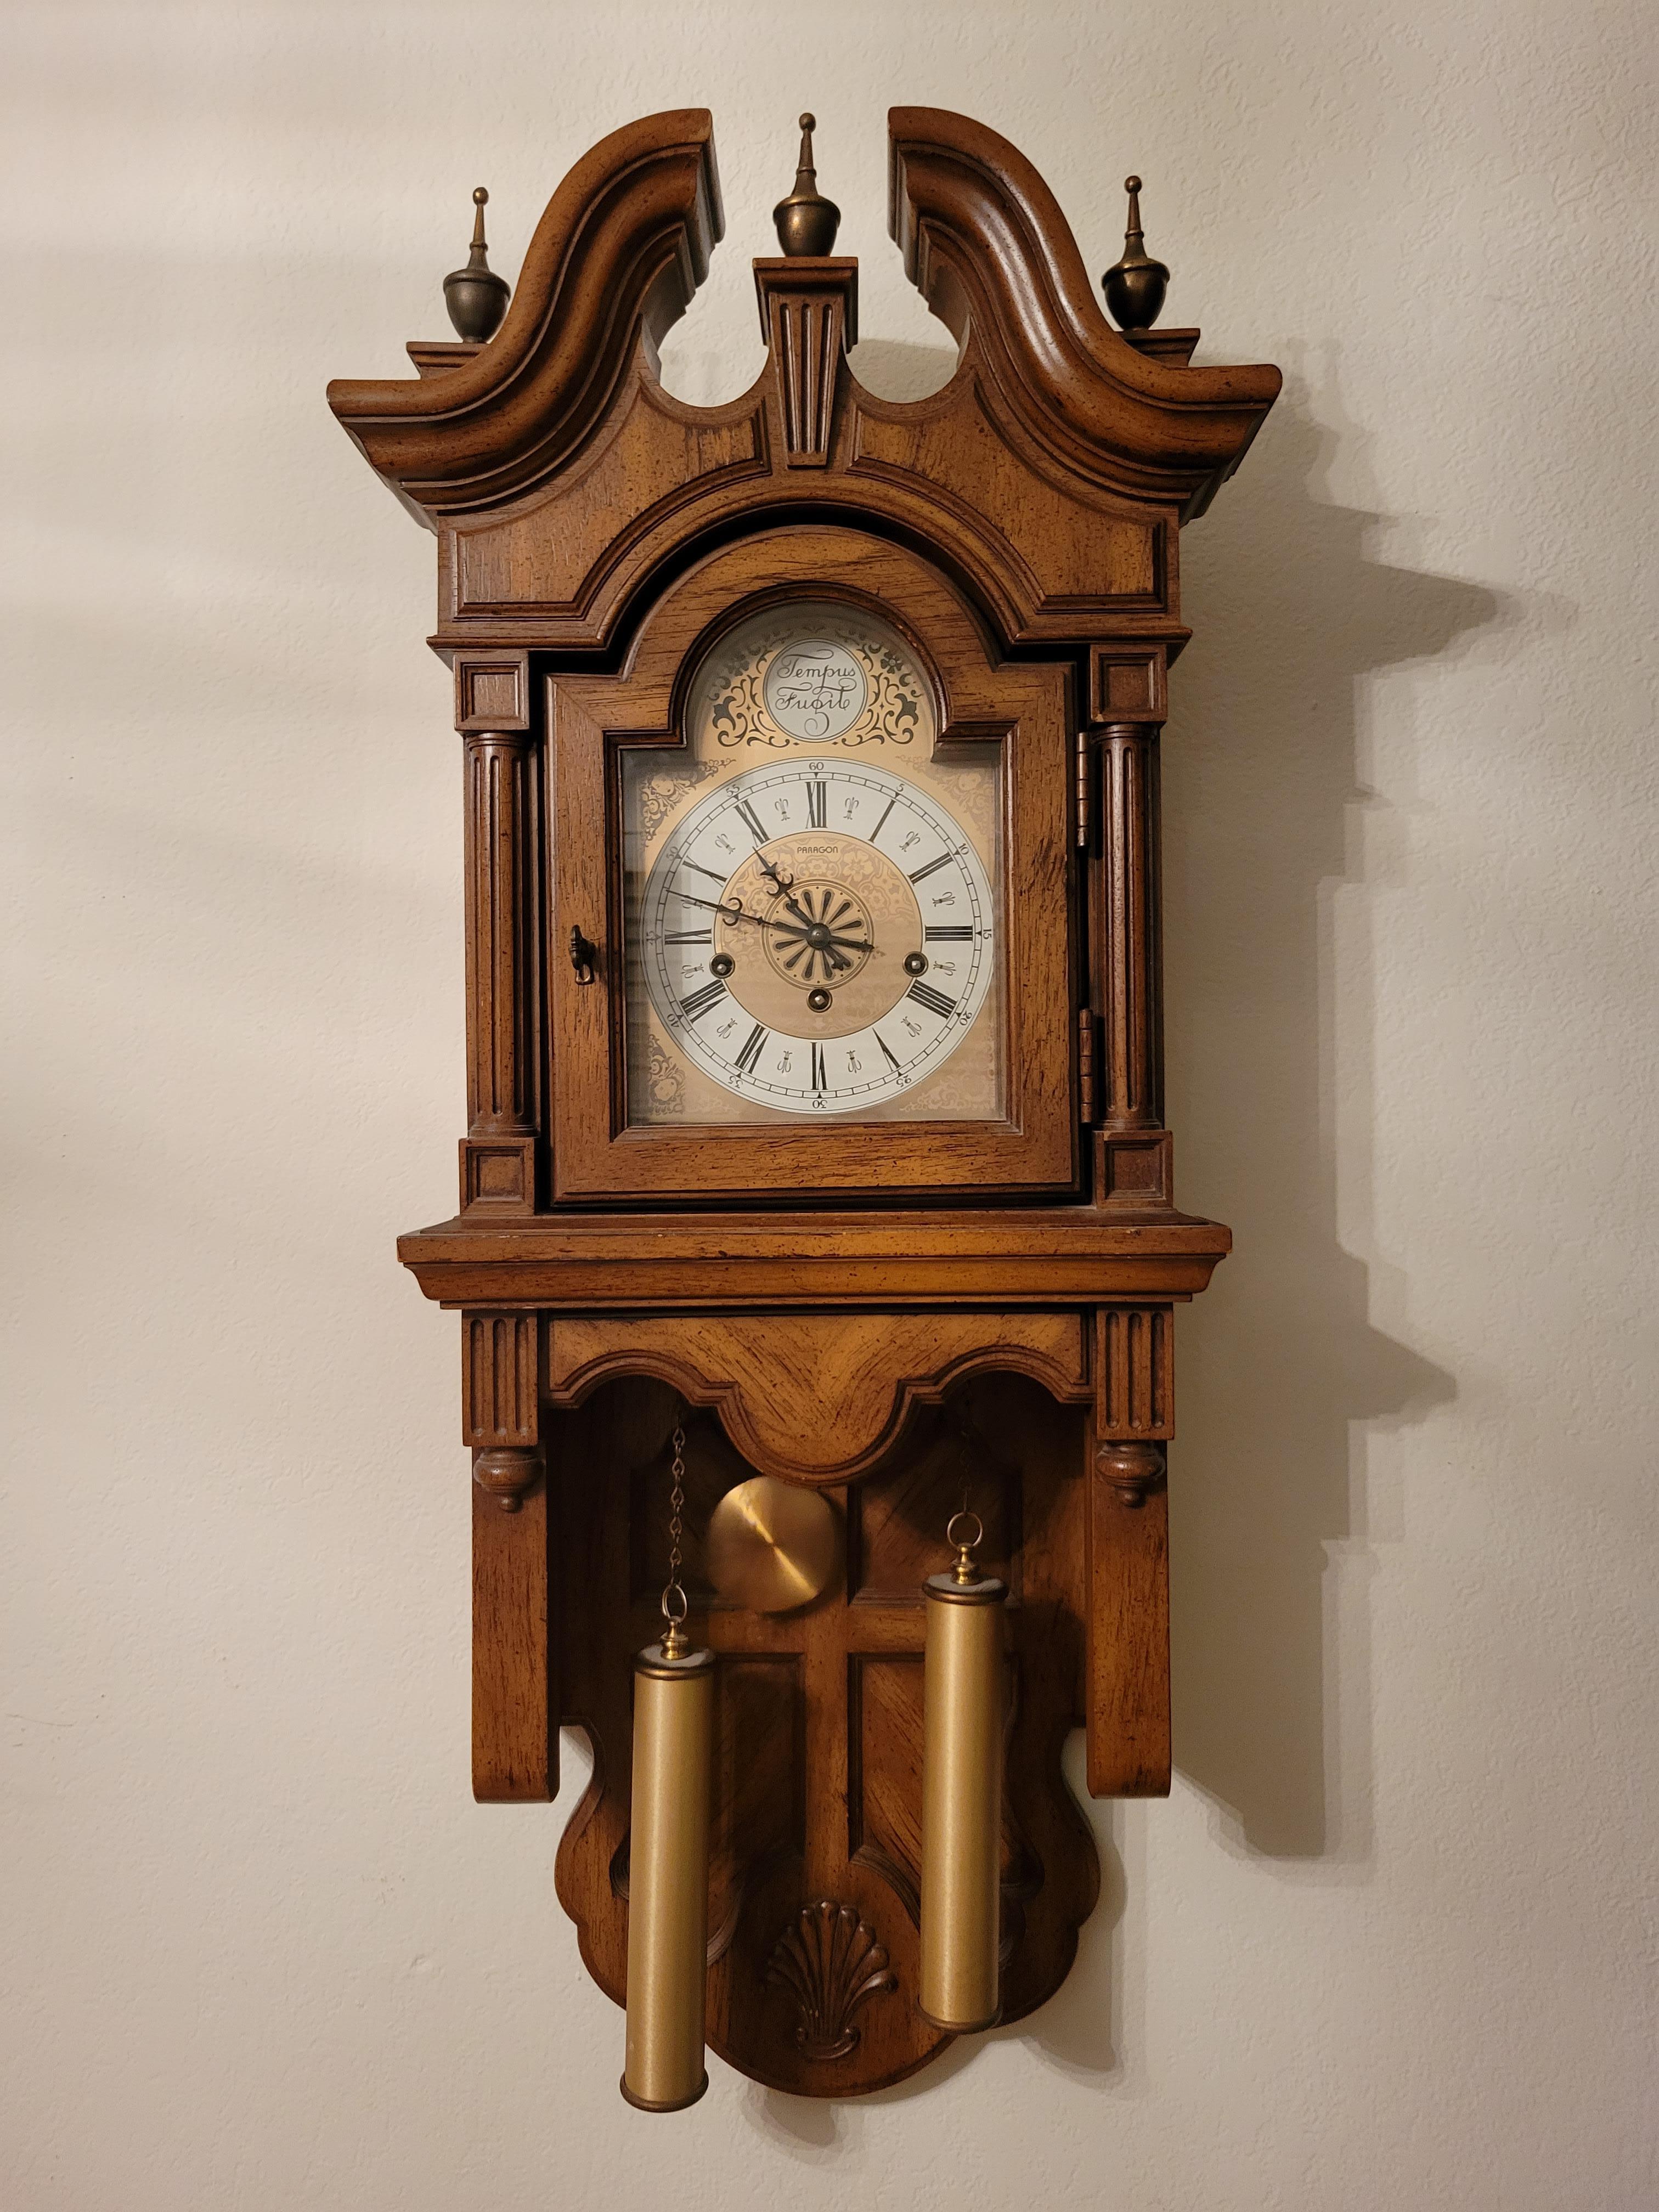 Vintage Paragon wall clock with Franz Hermle movement and a beautiful Westminster chime. It chimes 4 notes on 15 minutes, 8 notes at 30 minutes, 12 notes at 45 mintes and 16 notes on the hour.  The movement winds up with a key and they weights light